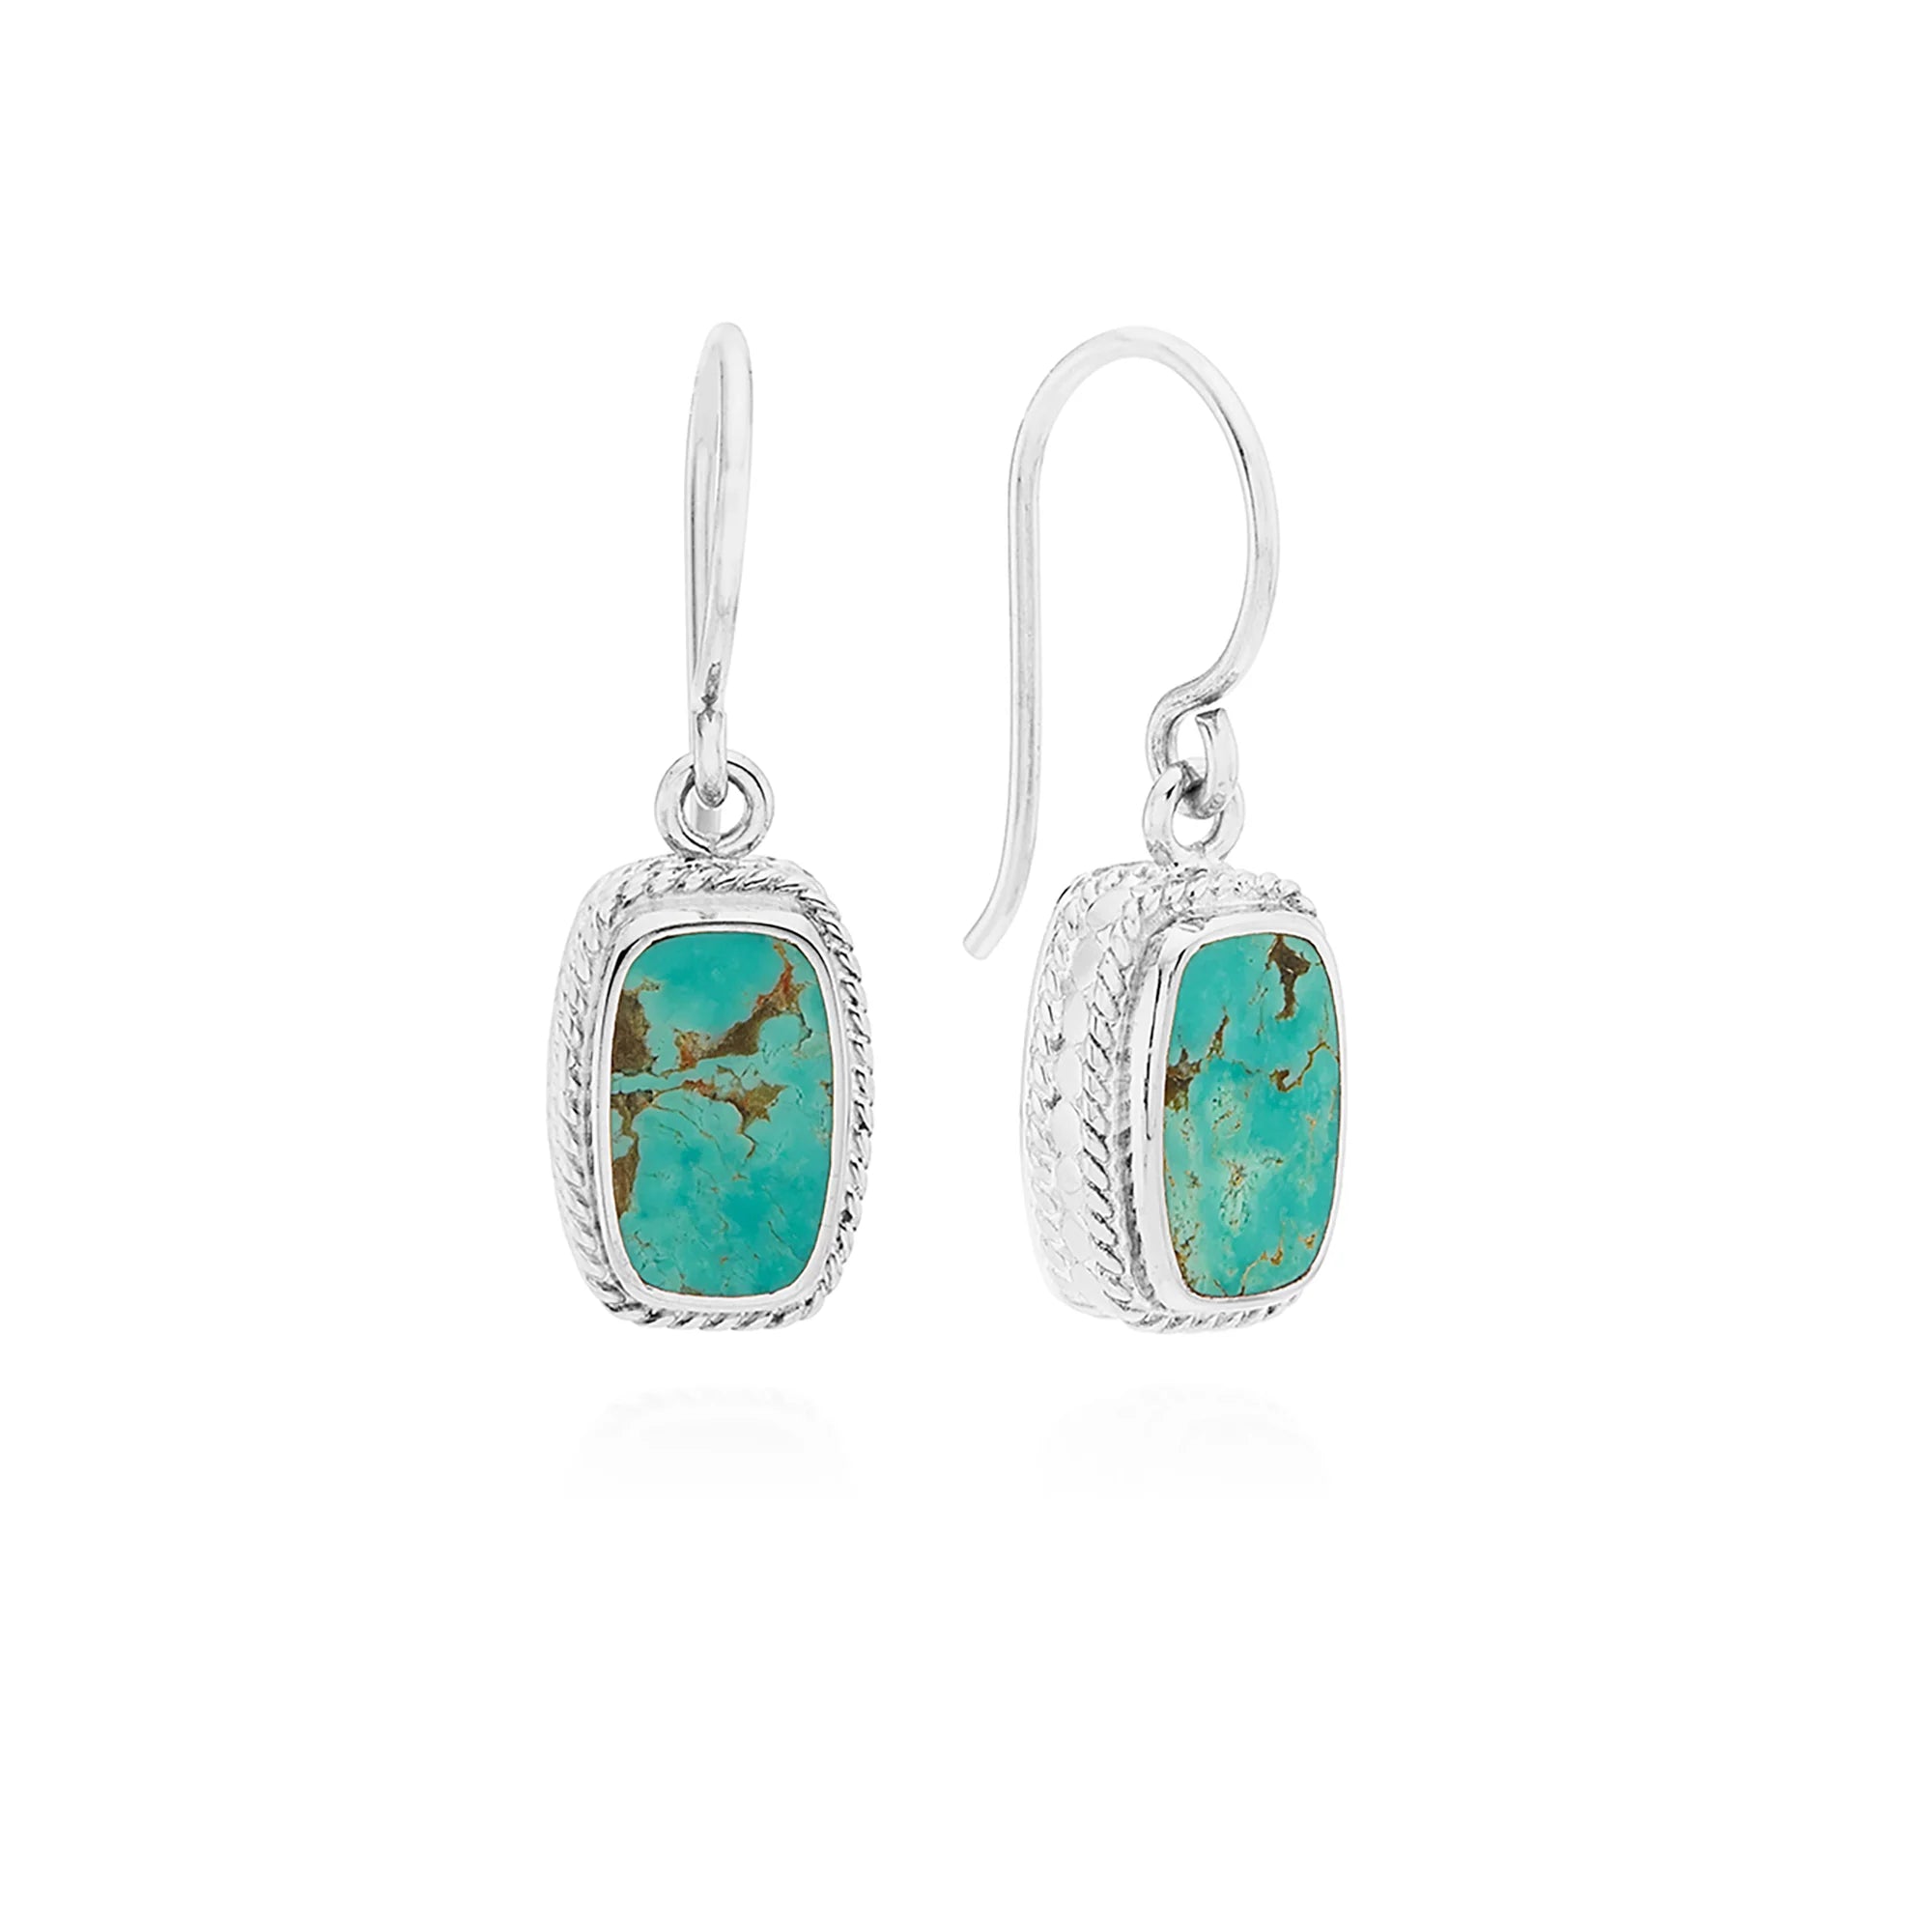 Silver and turquoise oblong cushion earrings